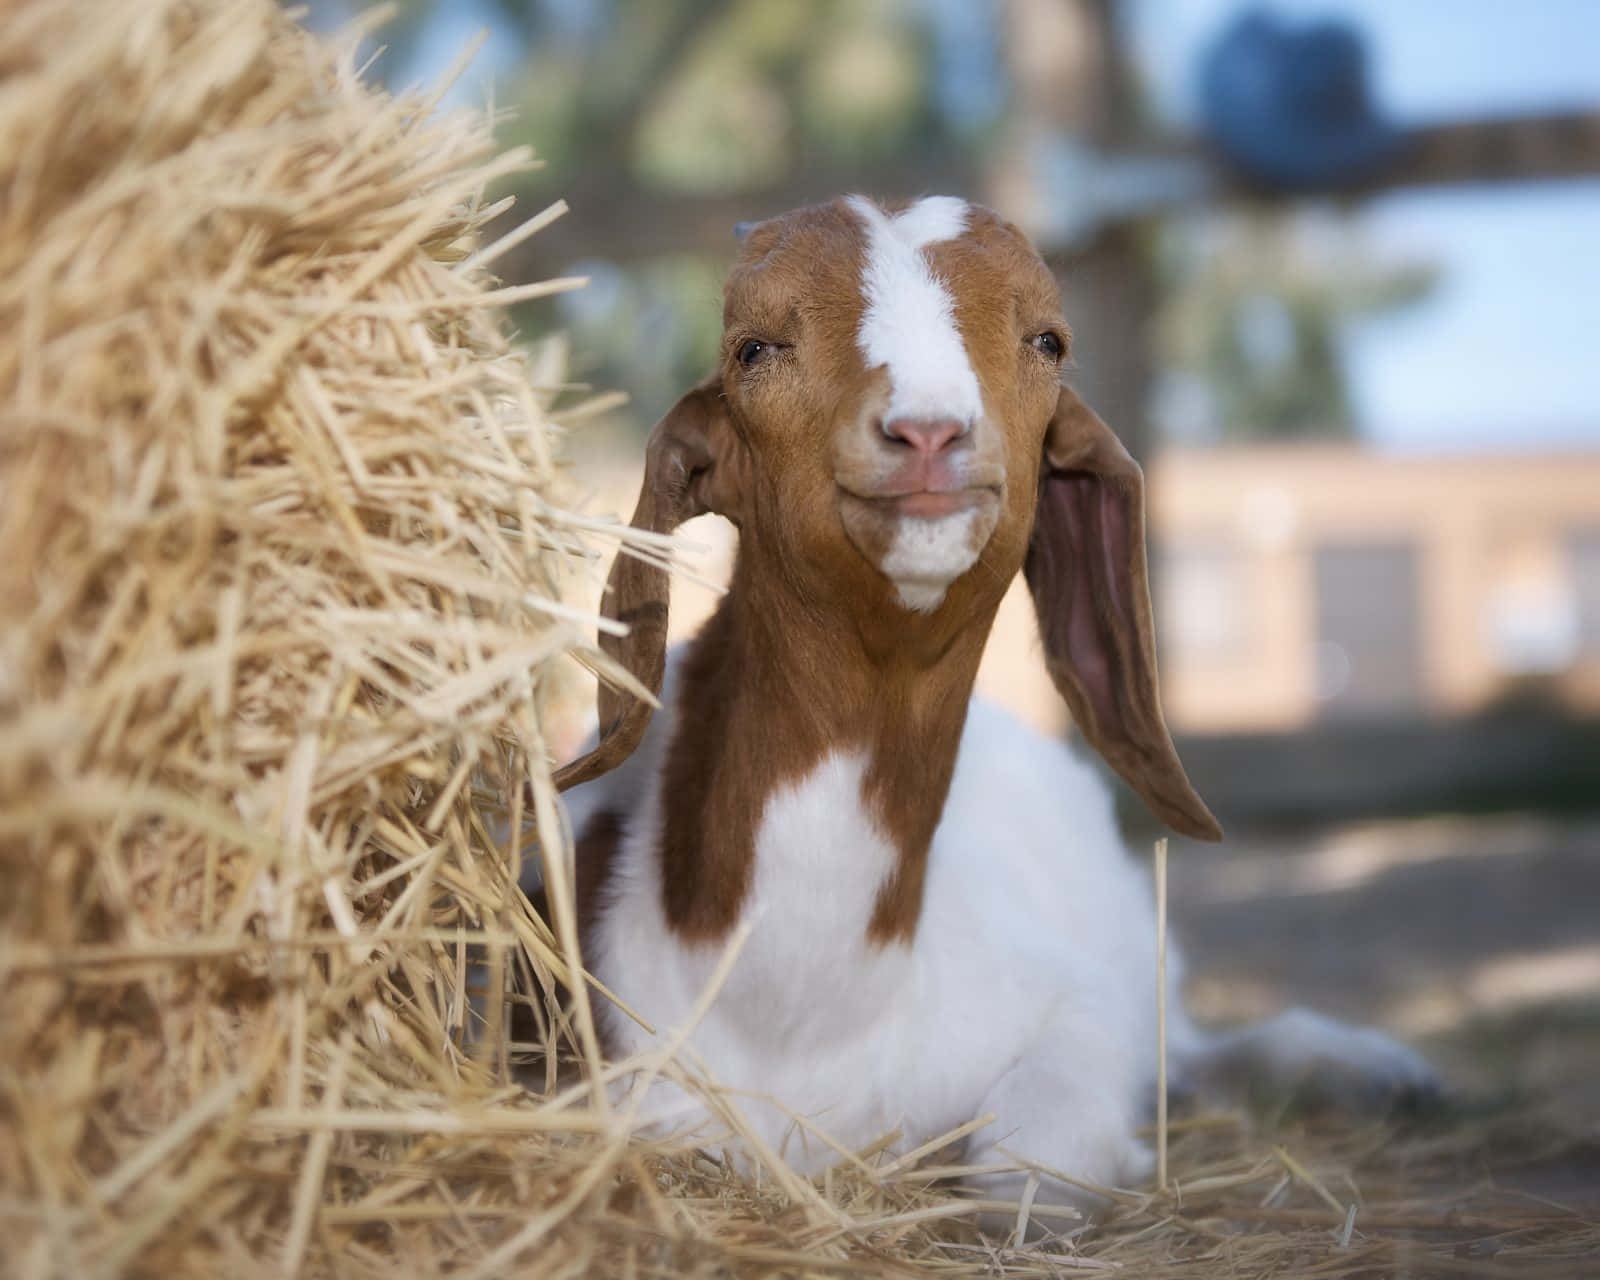 This curious little baby goat is looking for her next adventure.